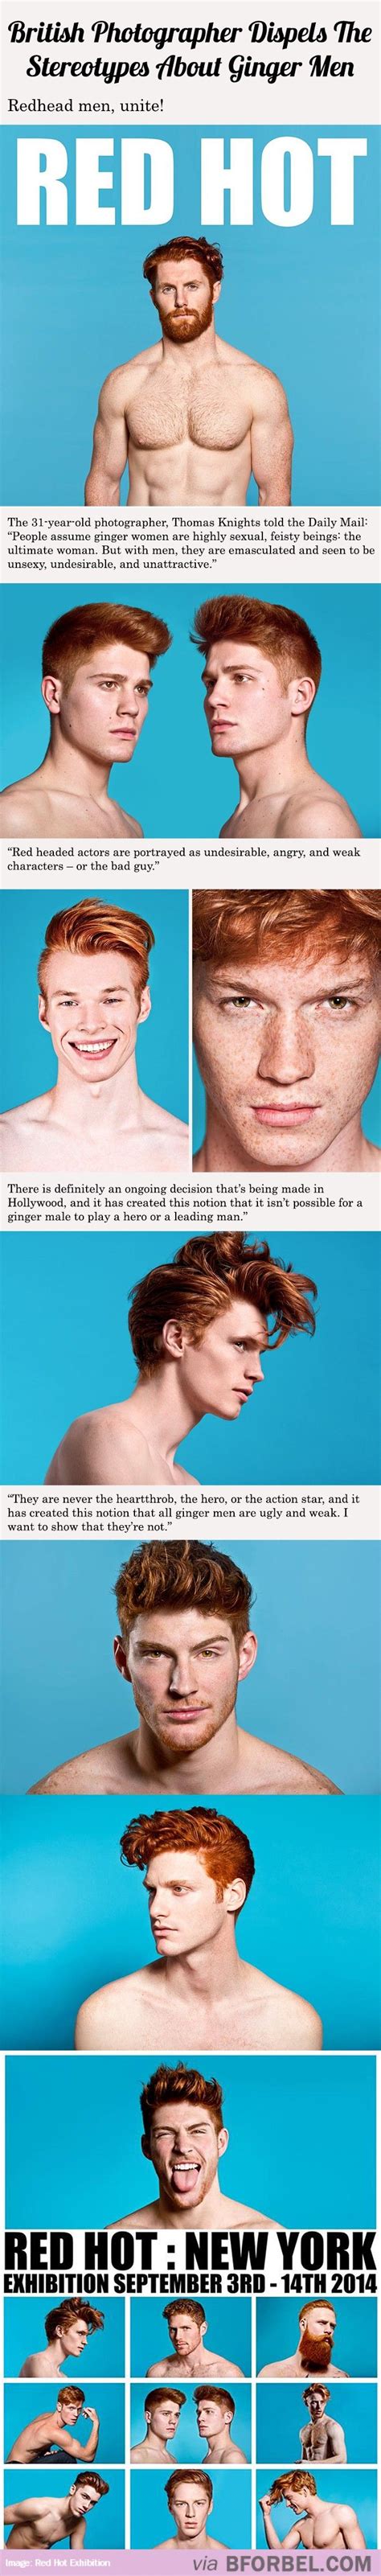 A British Photographer Dispels Stereotypes About Ginger Men With